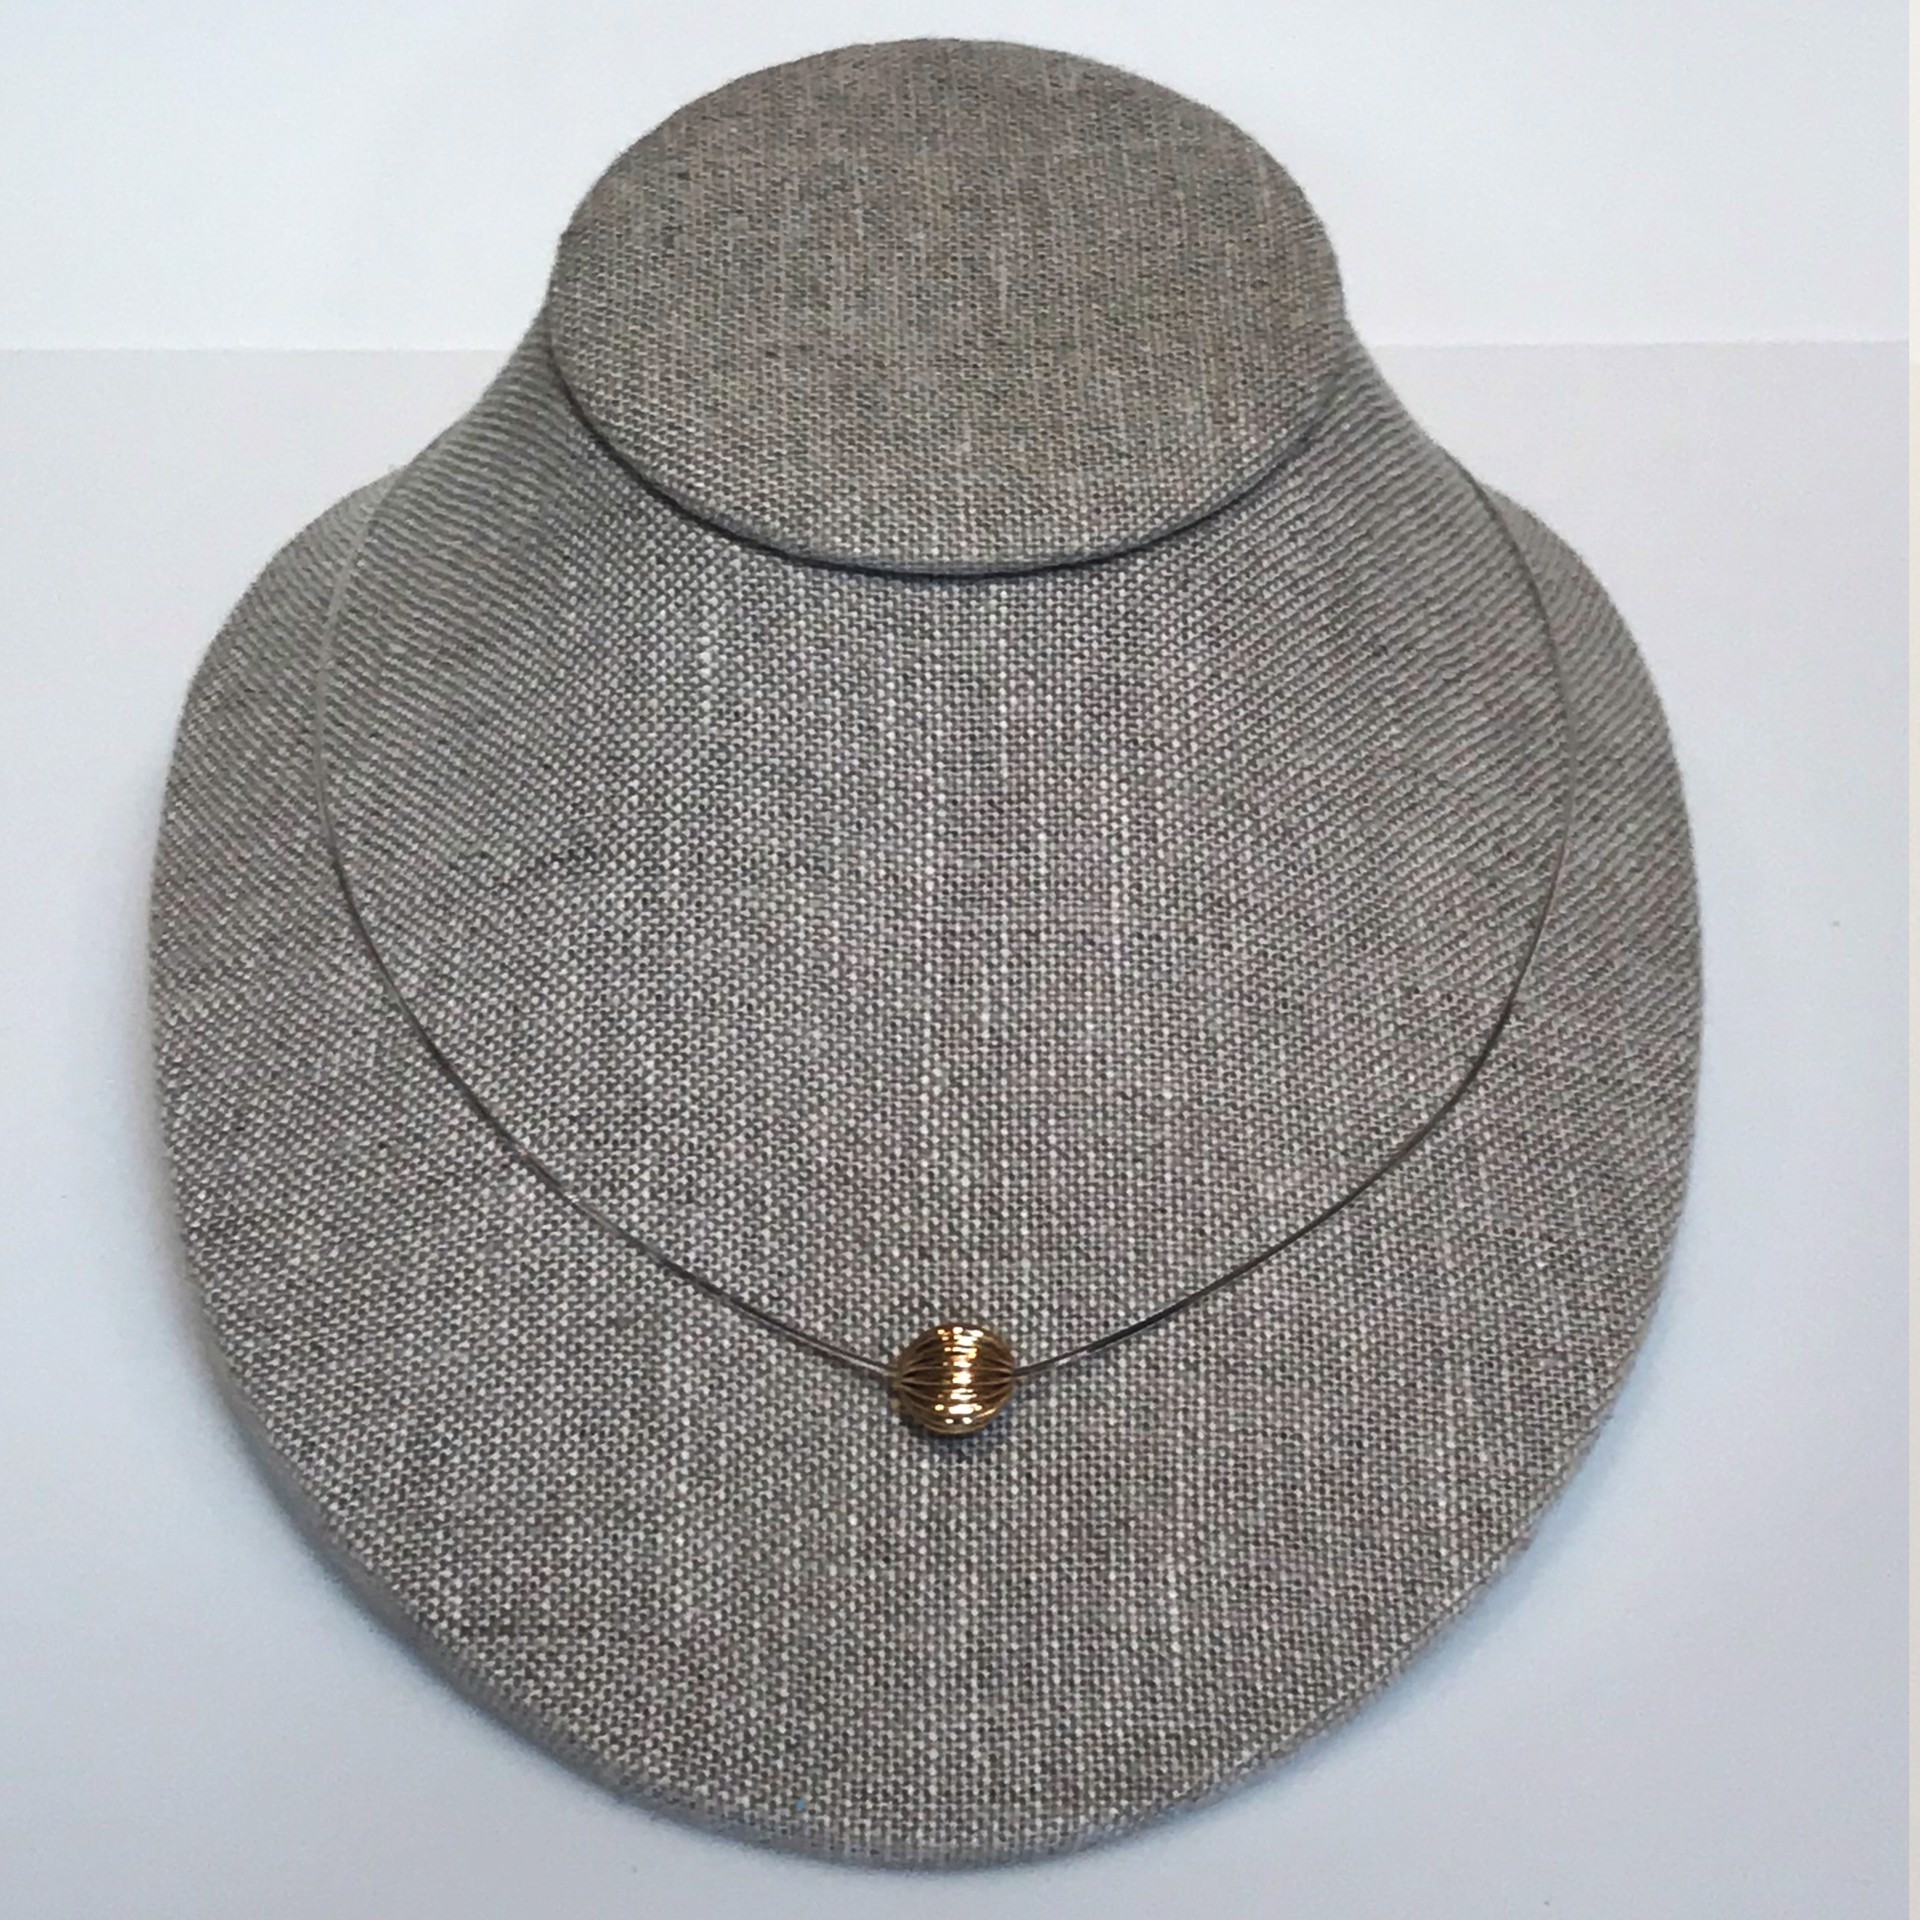 18" Eunity Necklace With Textured Gold Bead by Suzanne Woodworth